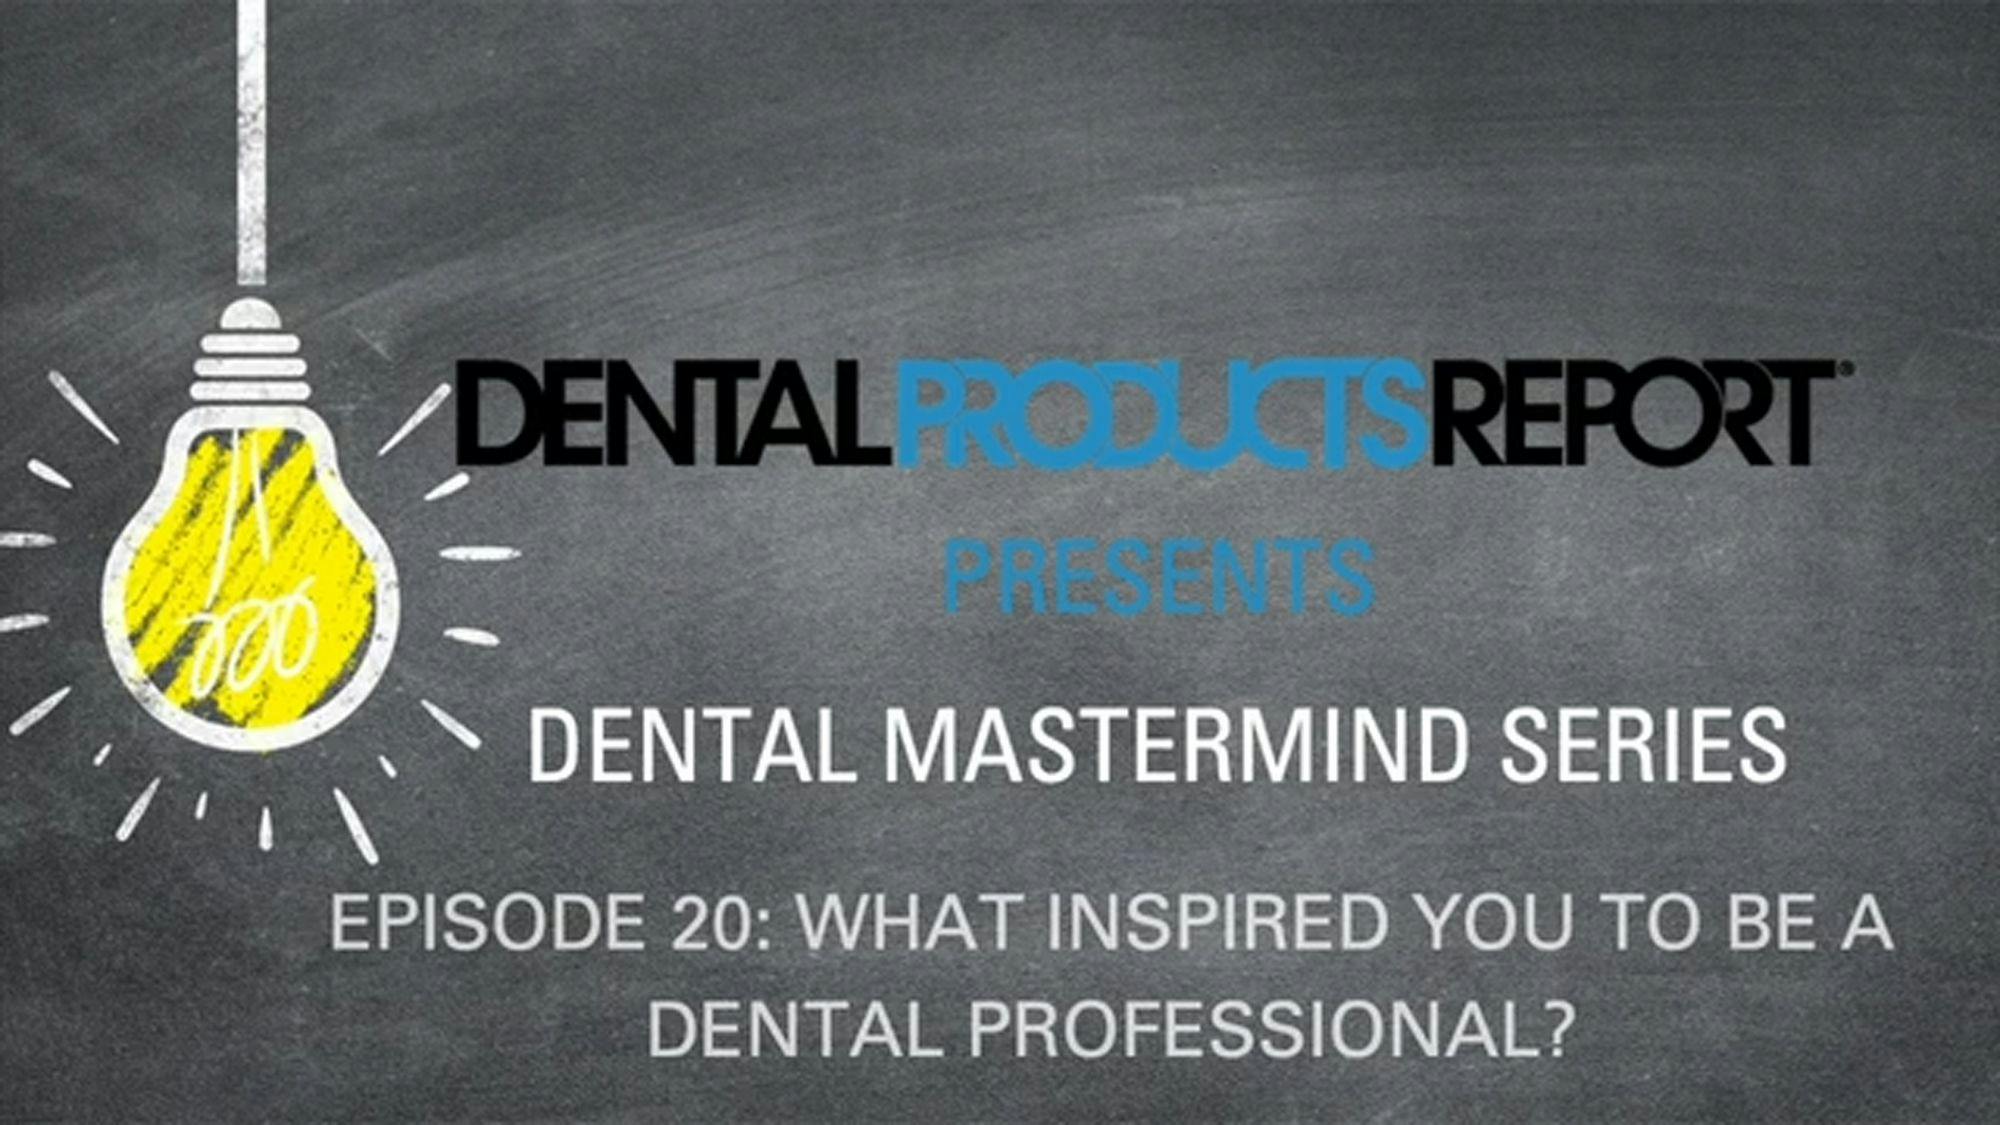 Mastermind - Episode 20 - What Inspired You to be a Dental Professional?